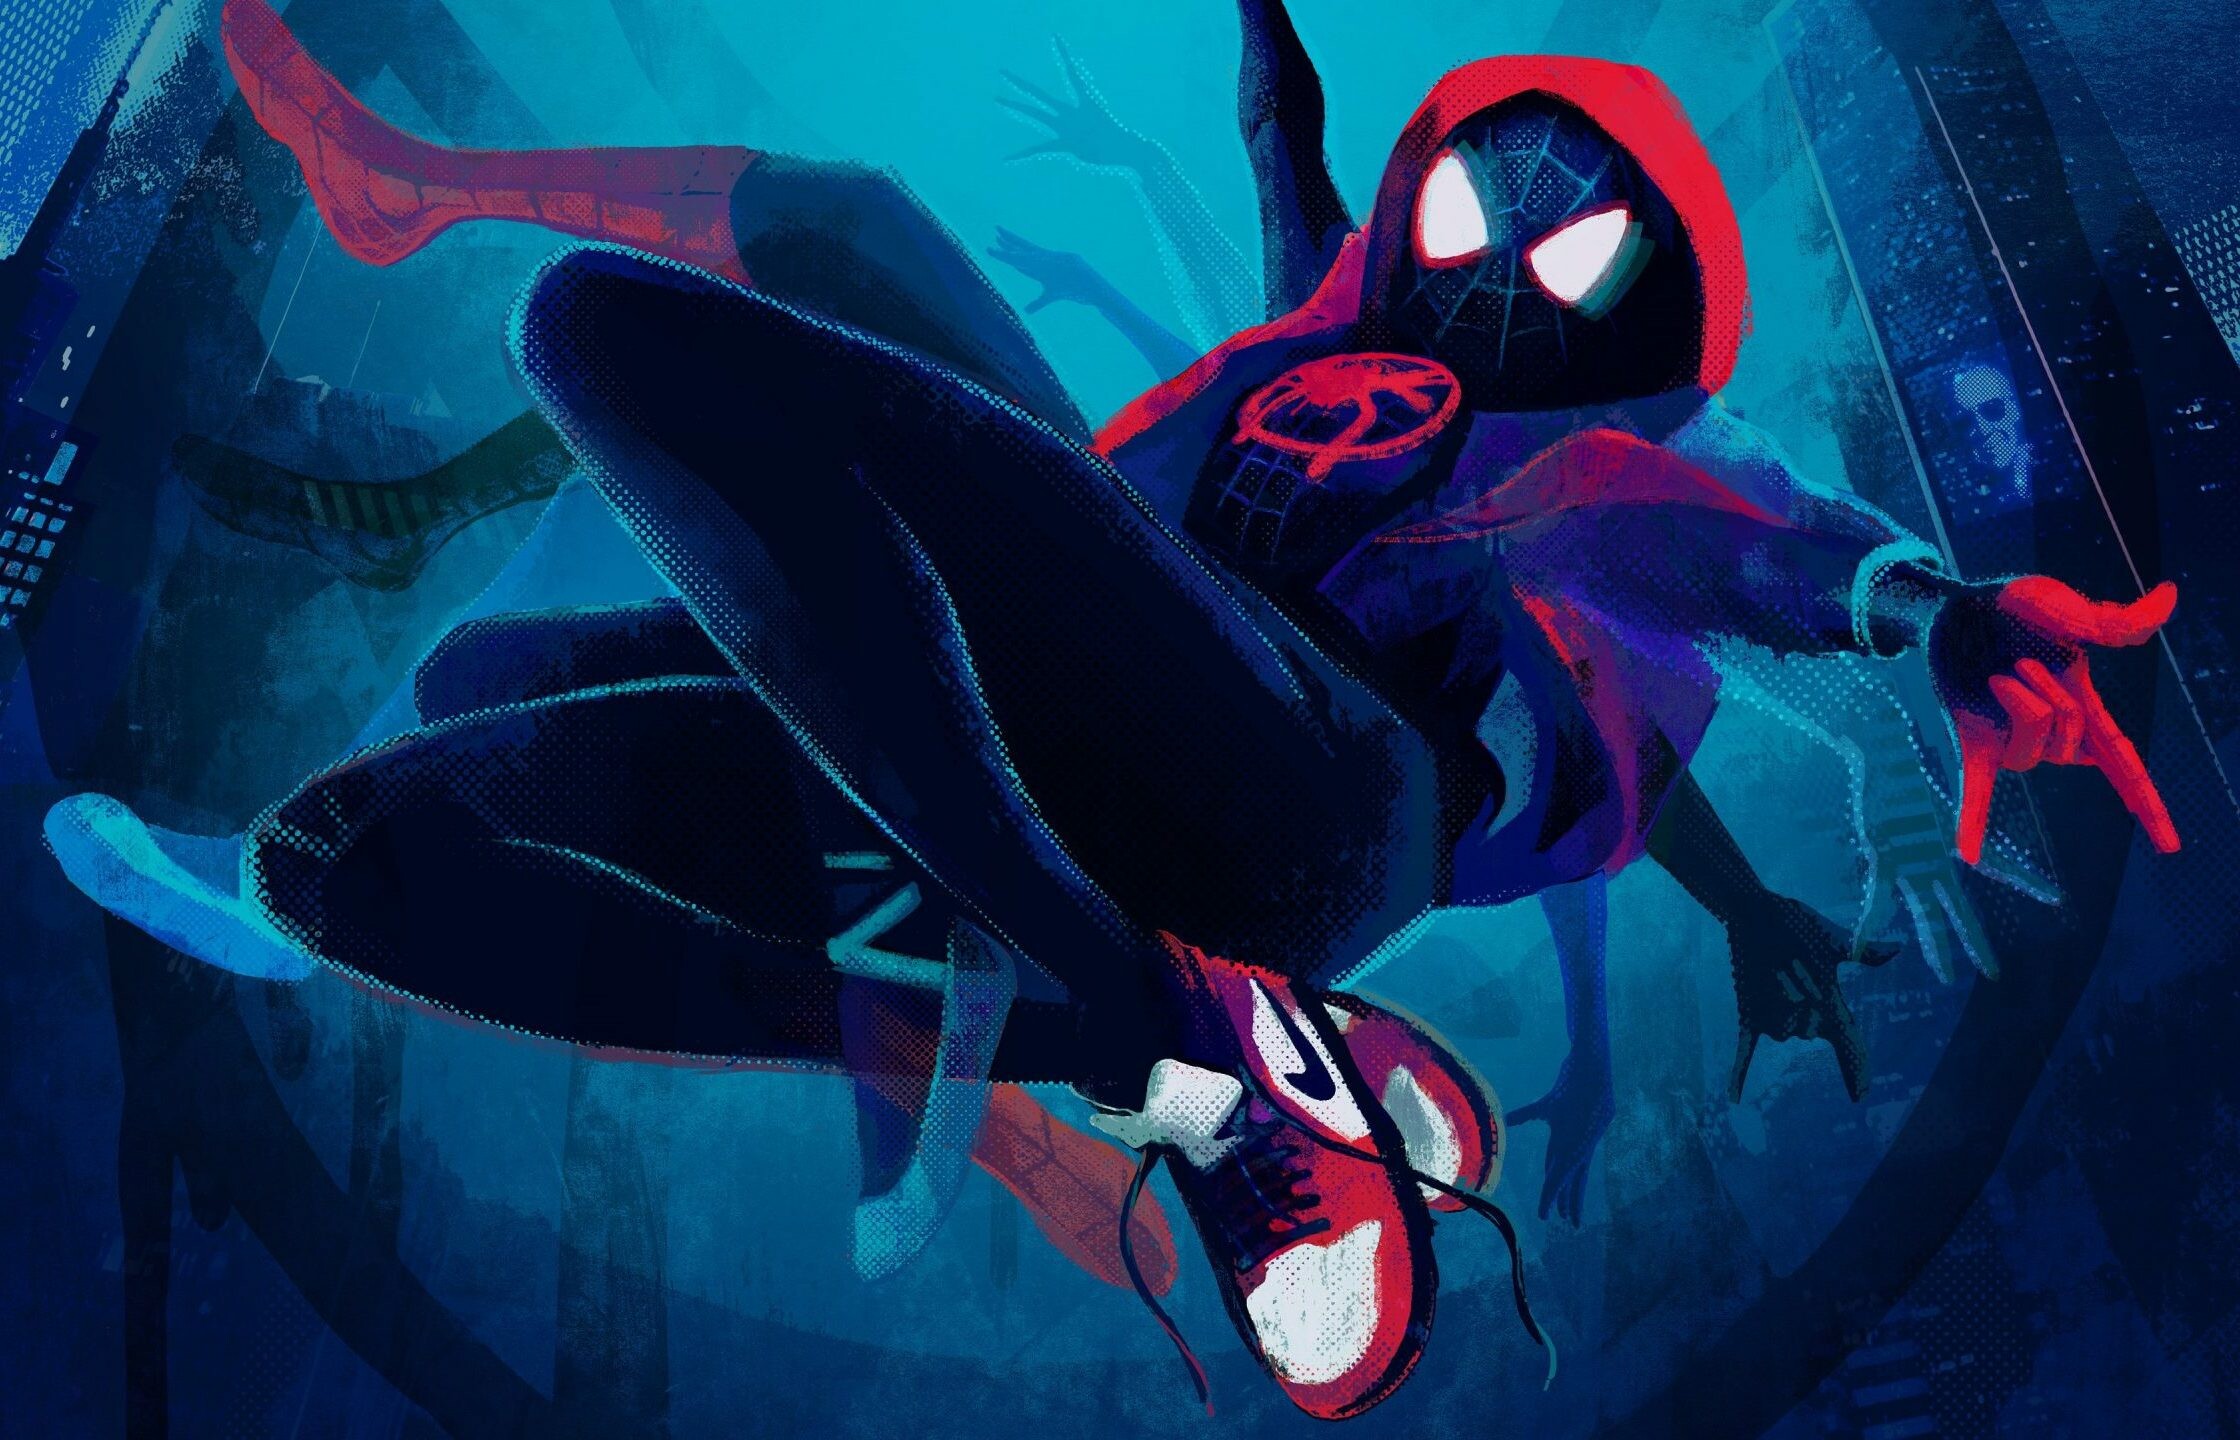 Spider-Man: Into the Spider-Verse: The film was released by Sony Pictures Releasing on December 14, 2018. 2240x1440 HD Wallpaper.